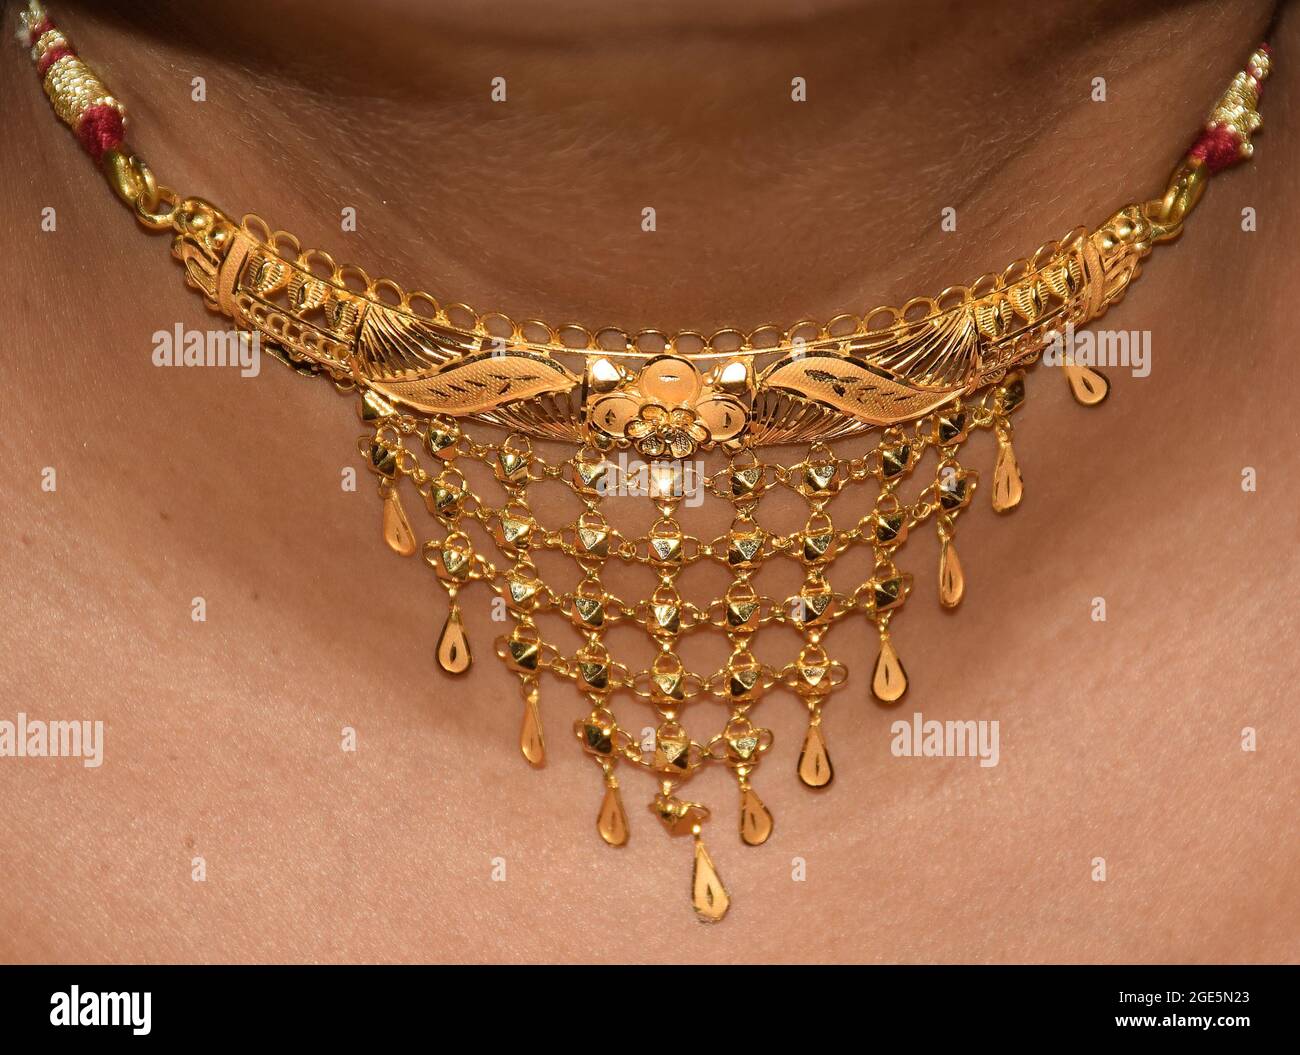 A Lady Showcasing Indian gold jewellery Choker on her neck Stock Photo -  Alamy